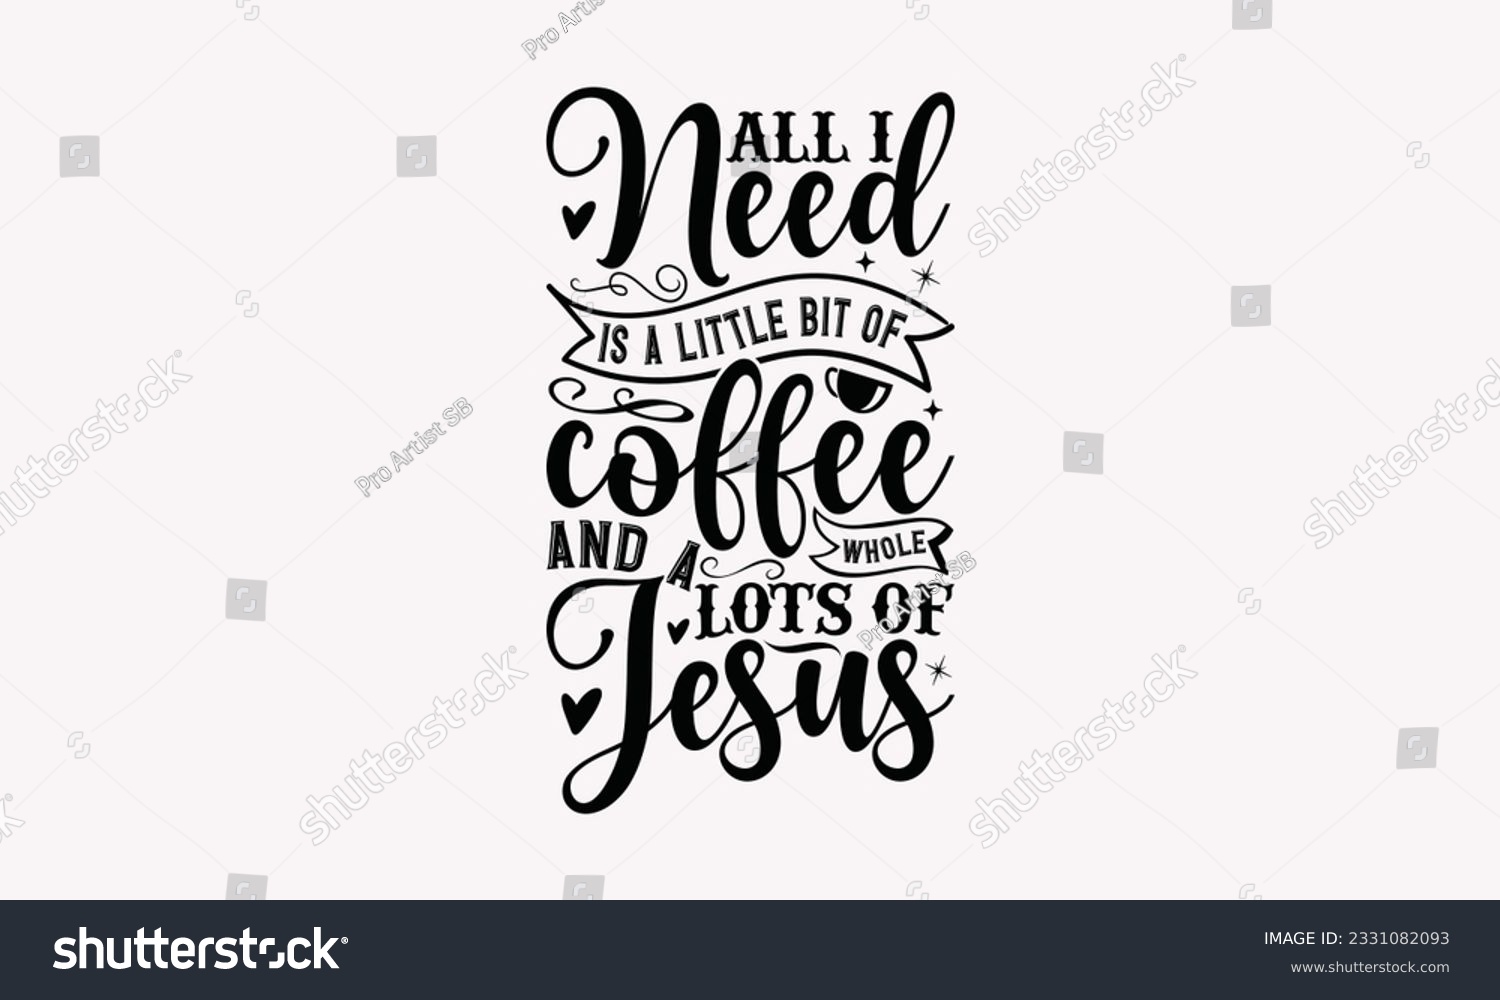 SVG of All I need is a little bit of coffee and a whole lots of jesus - Coffee SVG Design Template, Cheer Quotes, Hand drawn lettering phrase, Isolated on white background. svg